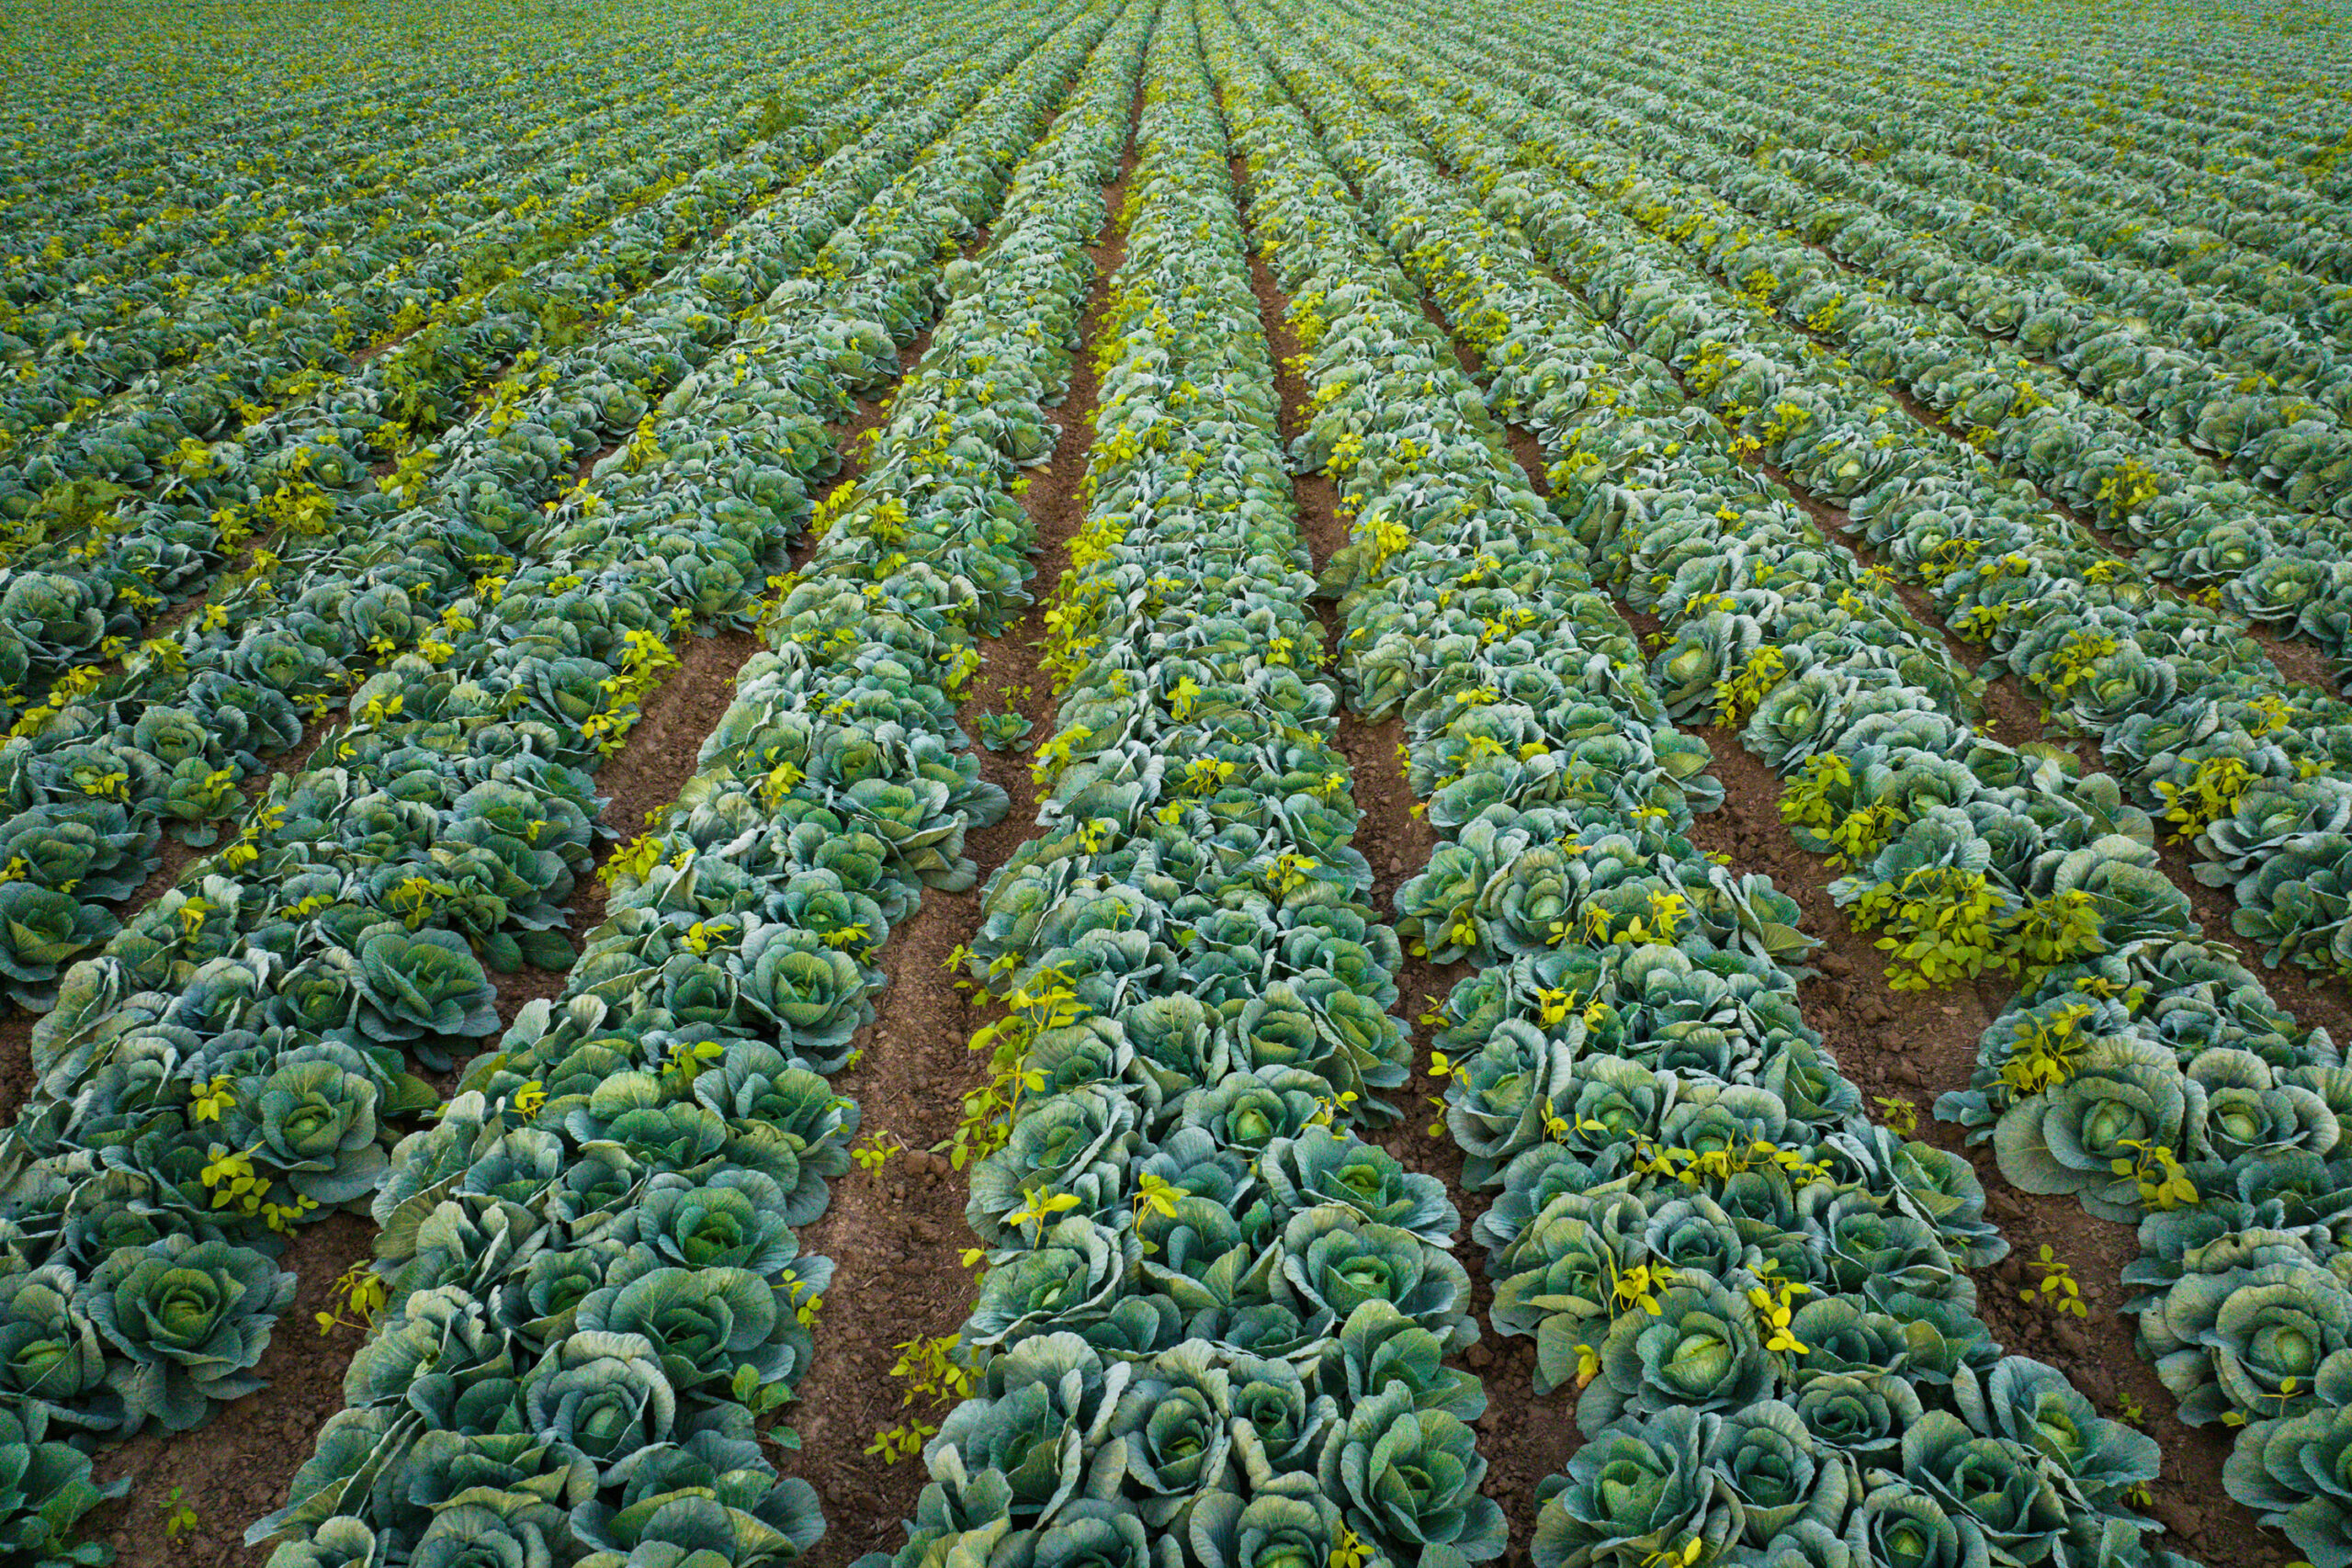 Aerial photo of cabbage growing in South Texas, near McAllen